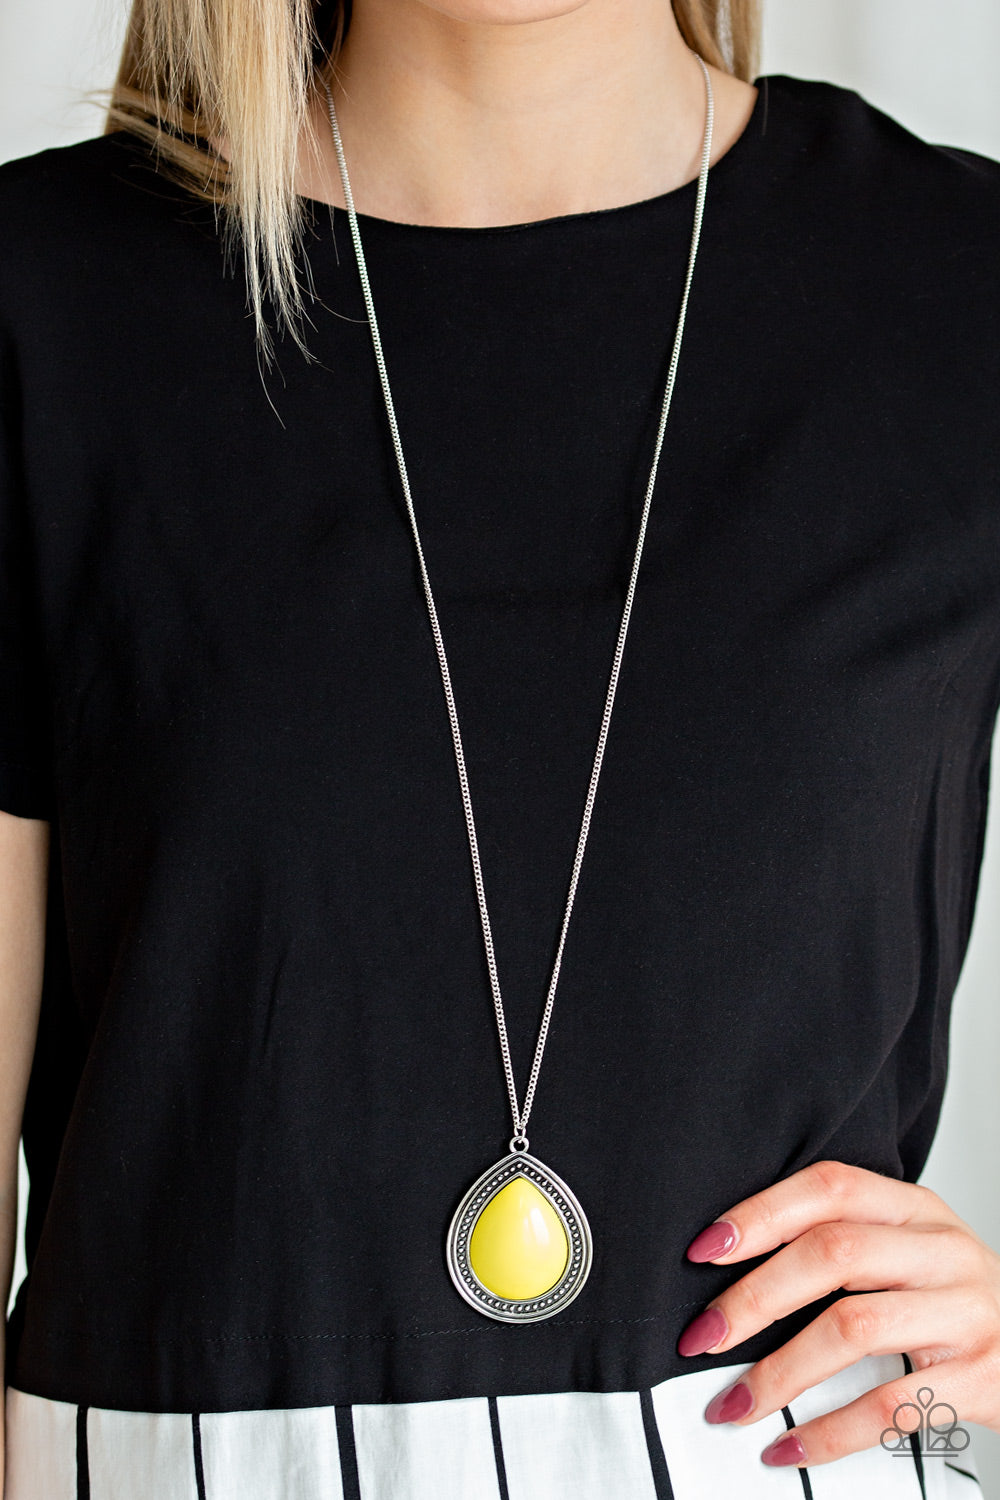 Chroma Courageous - Yellow Necklace - Paparazzi Accessories 